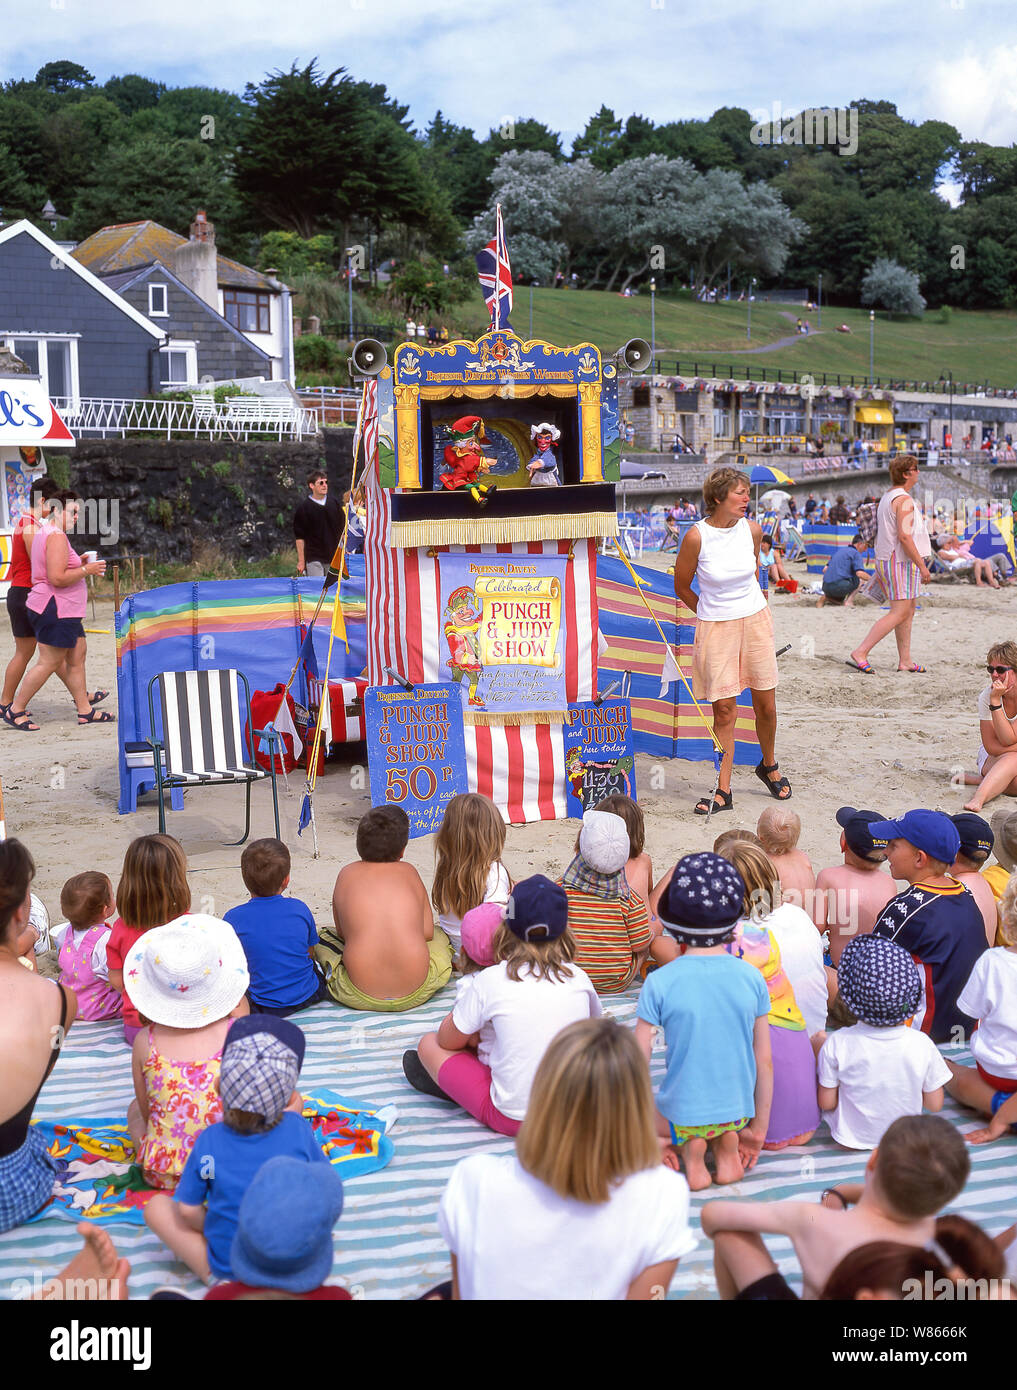 Children watching traditional 'Punch and Judy' puppet show on beach, Lyme Regis, Dorset, England, United Kingdom Stock Photo